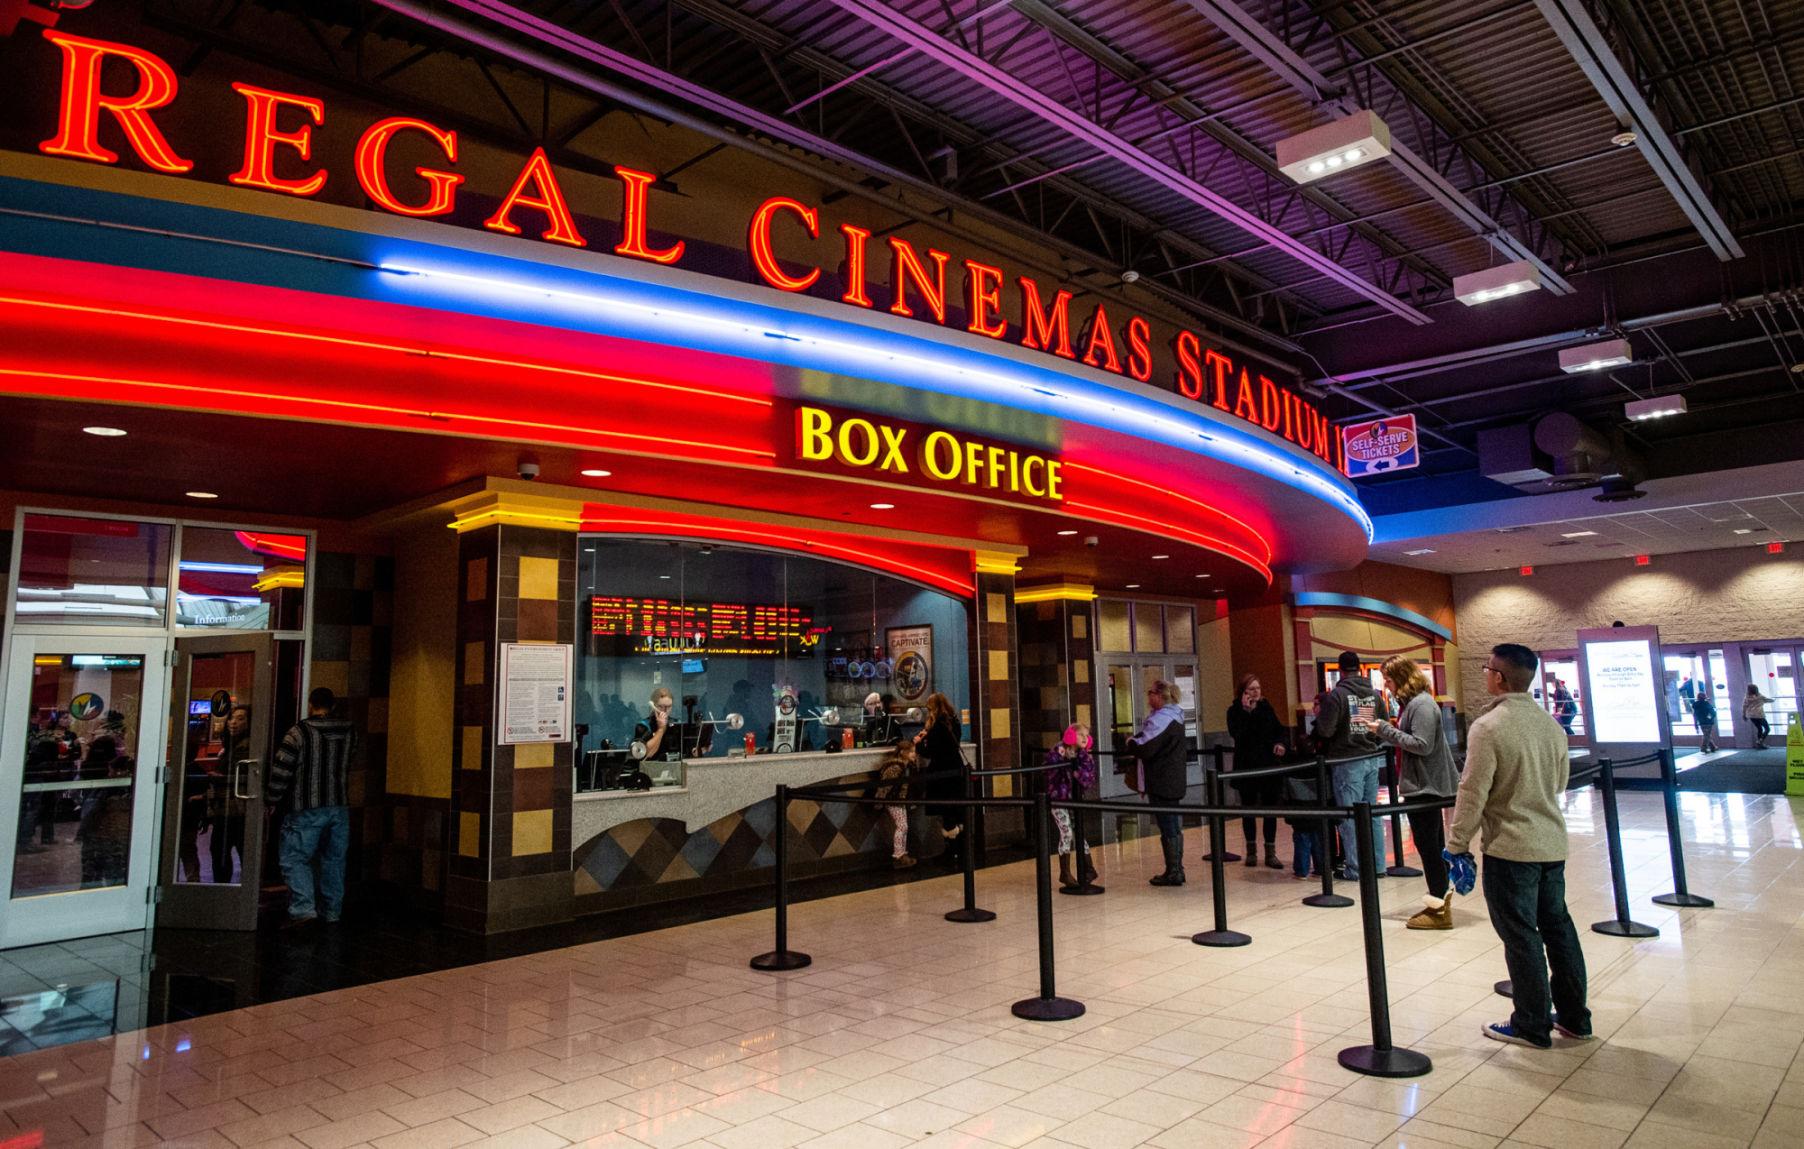 Regal Cinemas plans to reopen theaters starting July 10 Jefferson